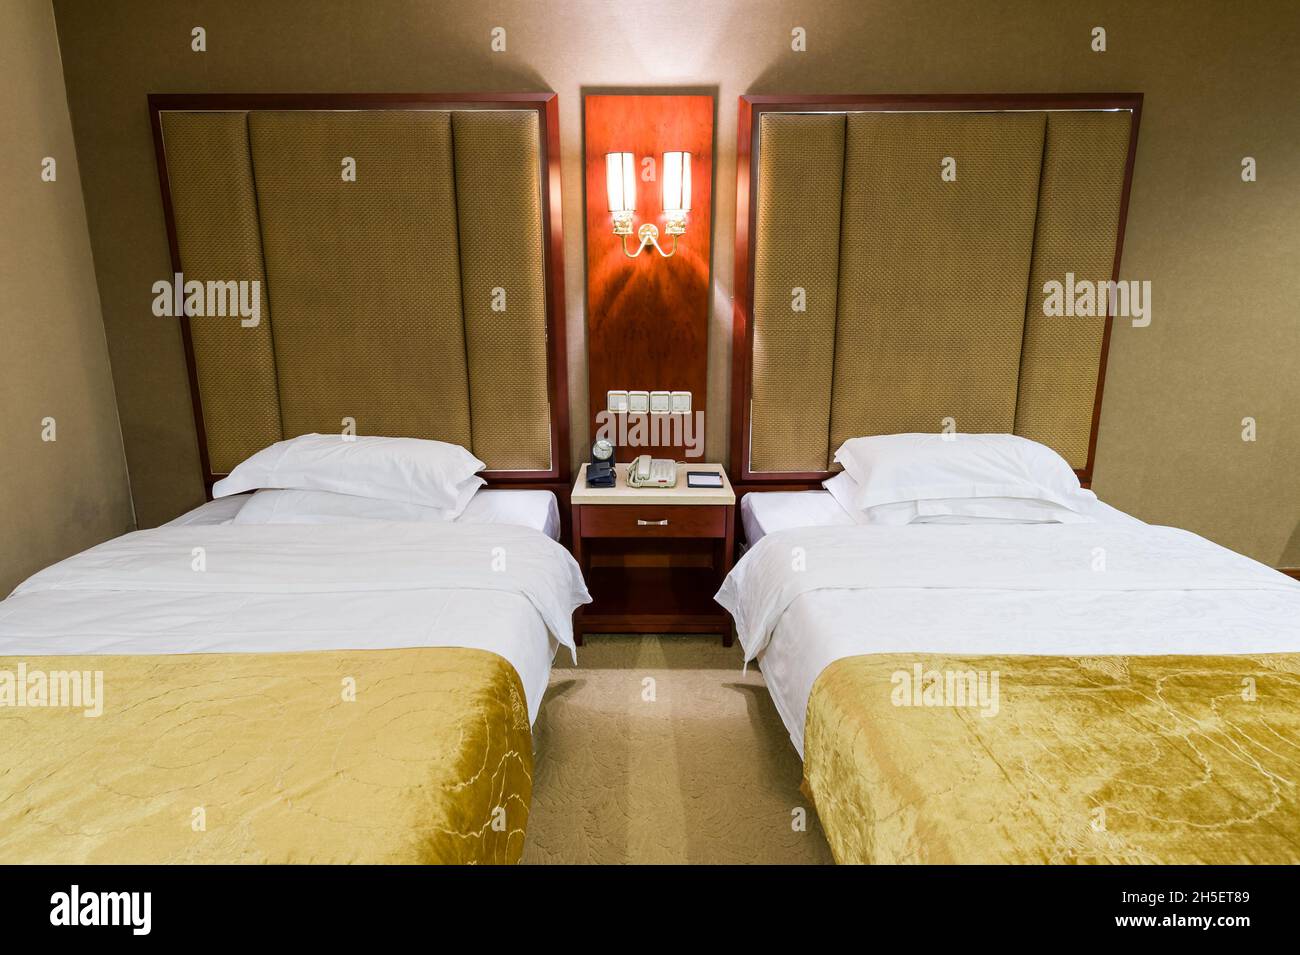 Luxurious interior of spacious hotel room with twin beds. Stock Photo